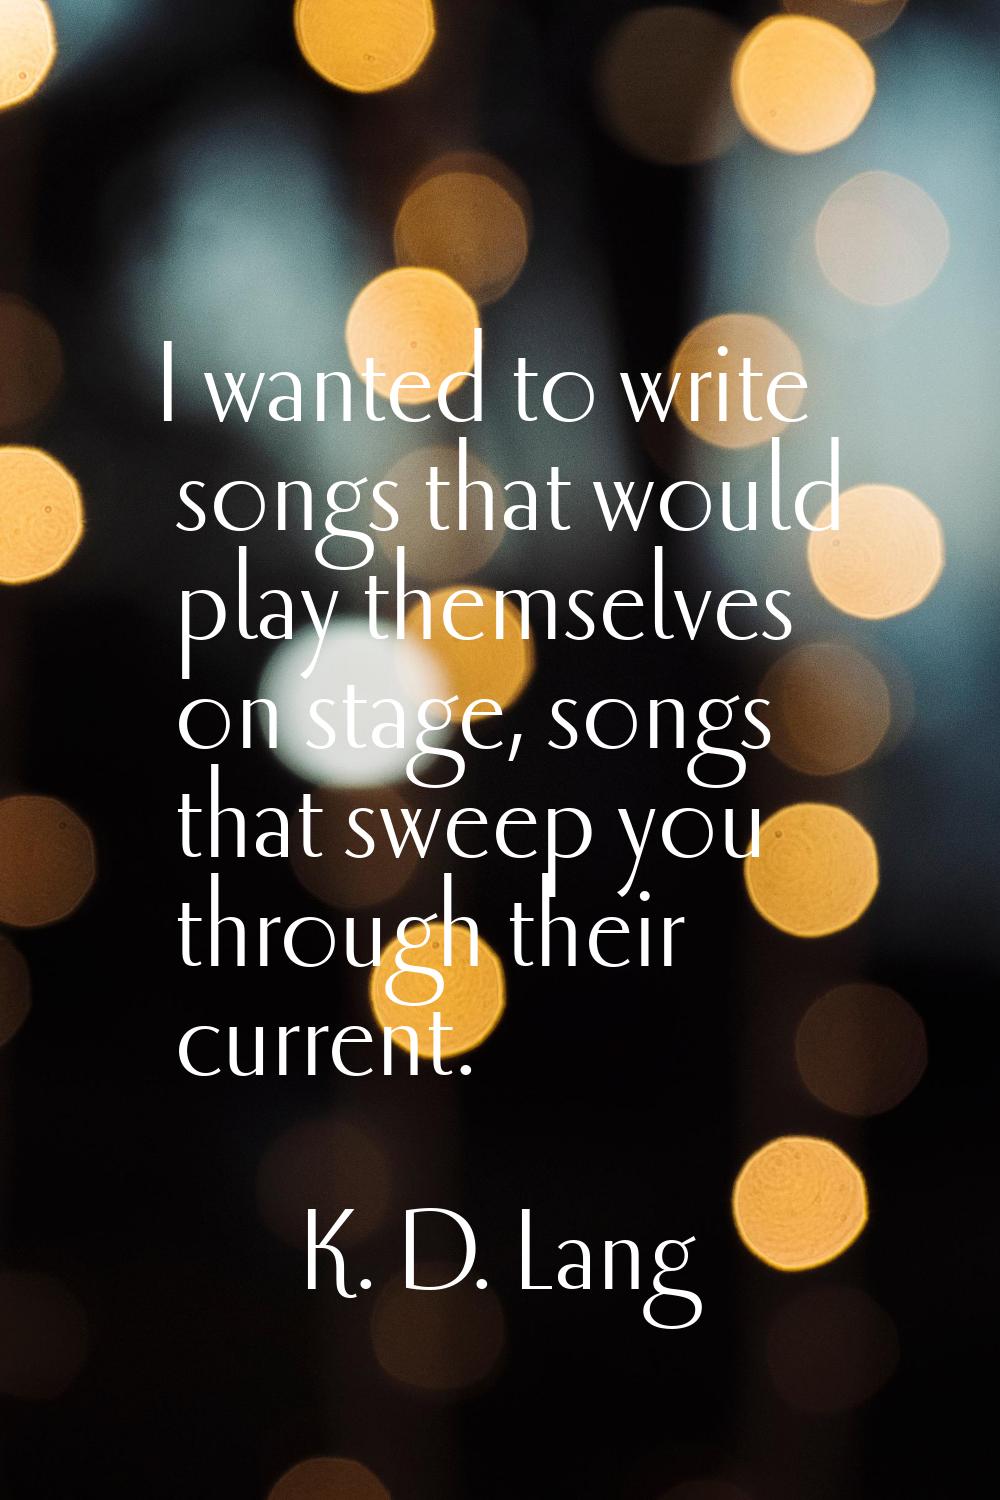 I wanted to write songs that would play themselves on stage, songs that sweep you through their cur